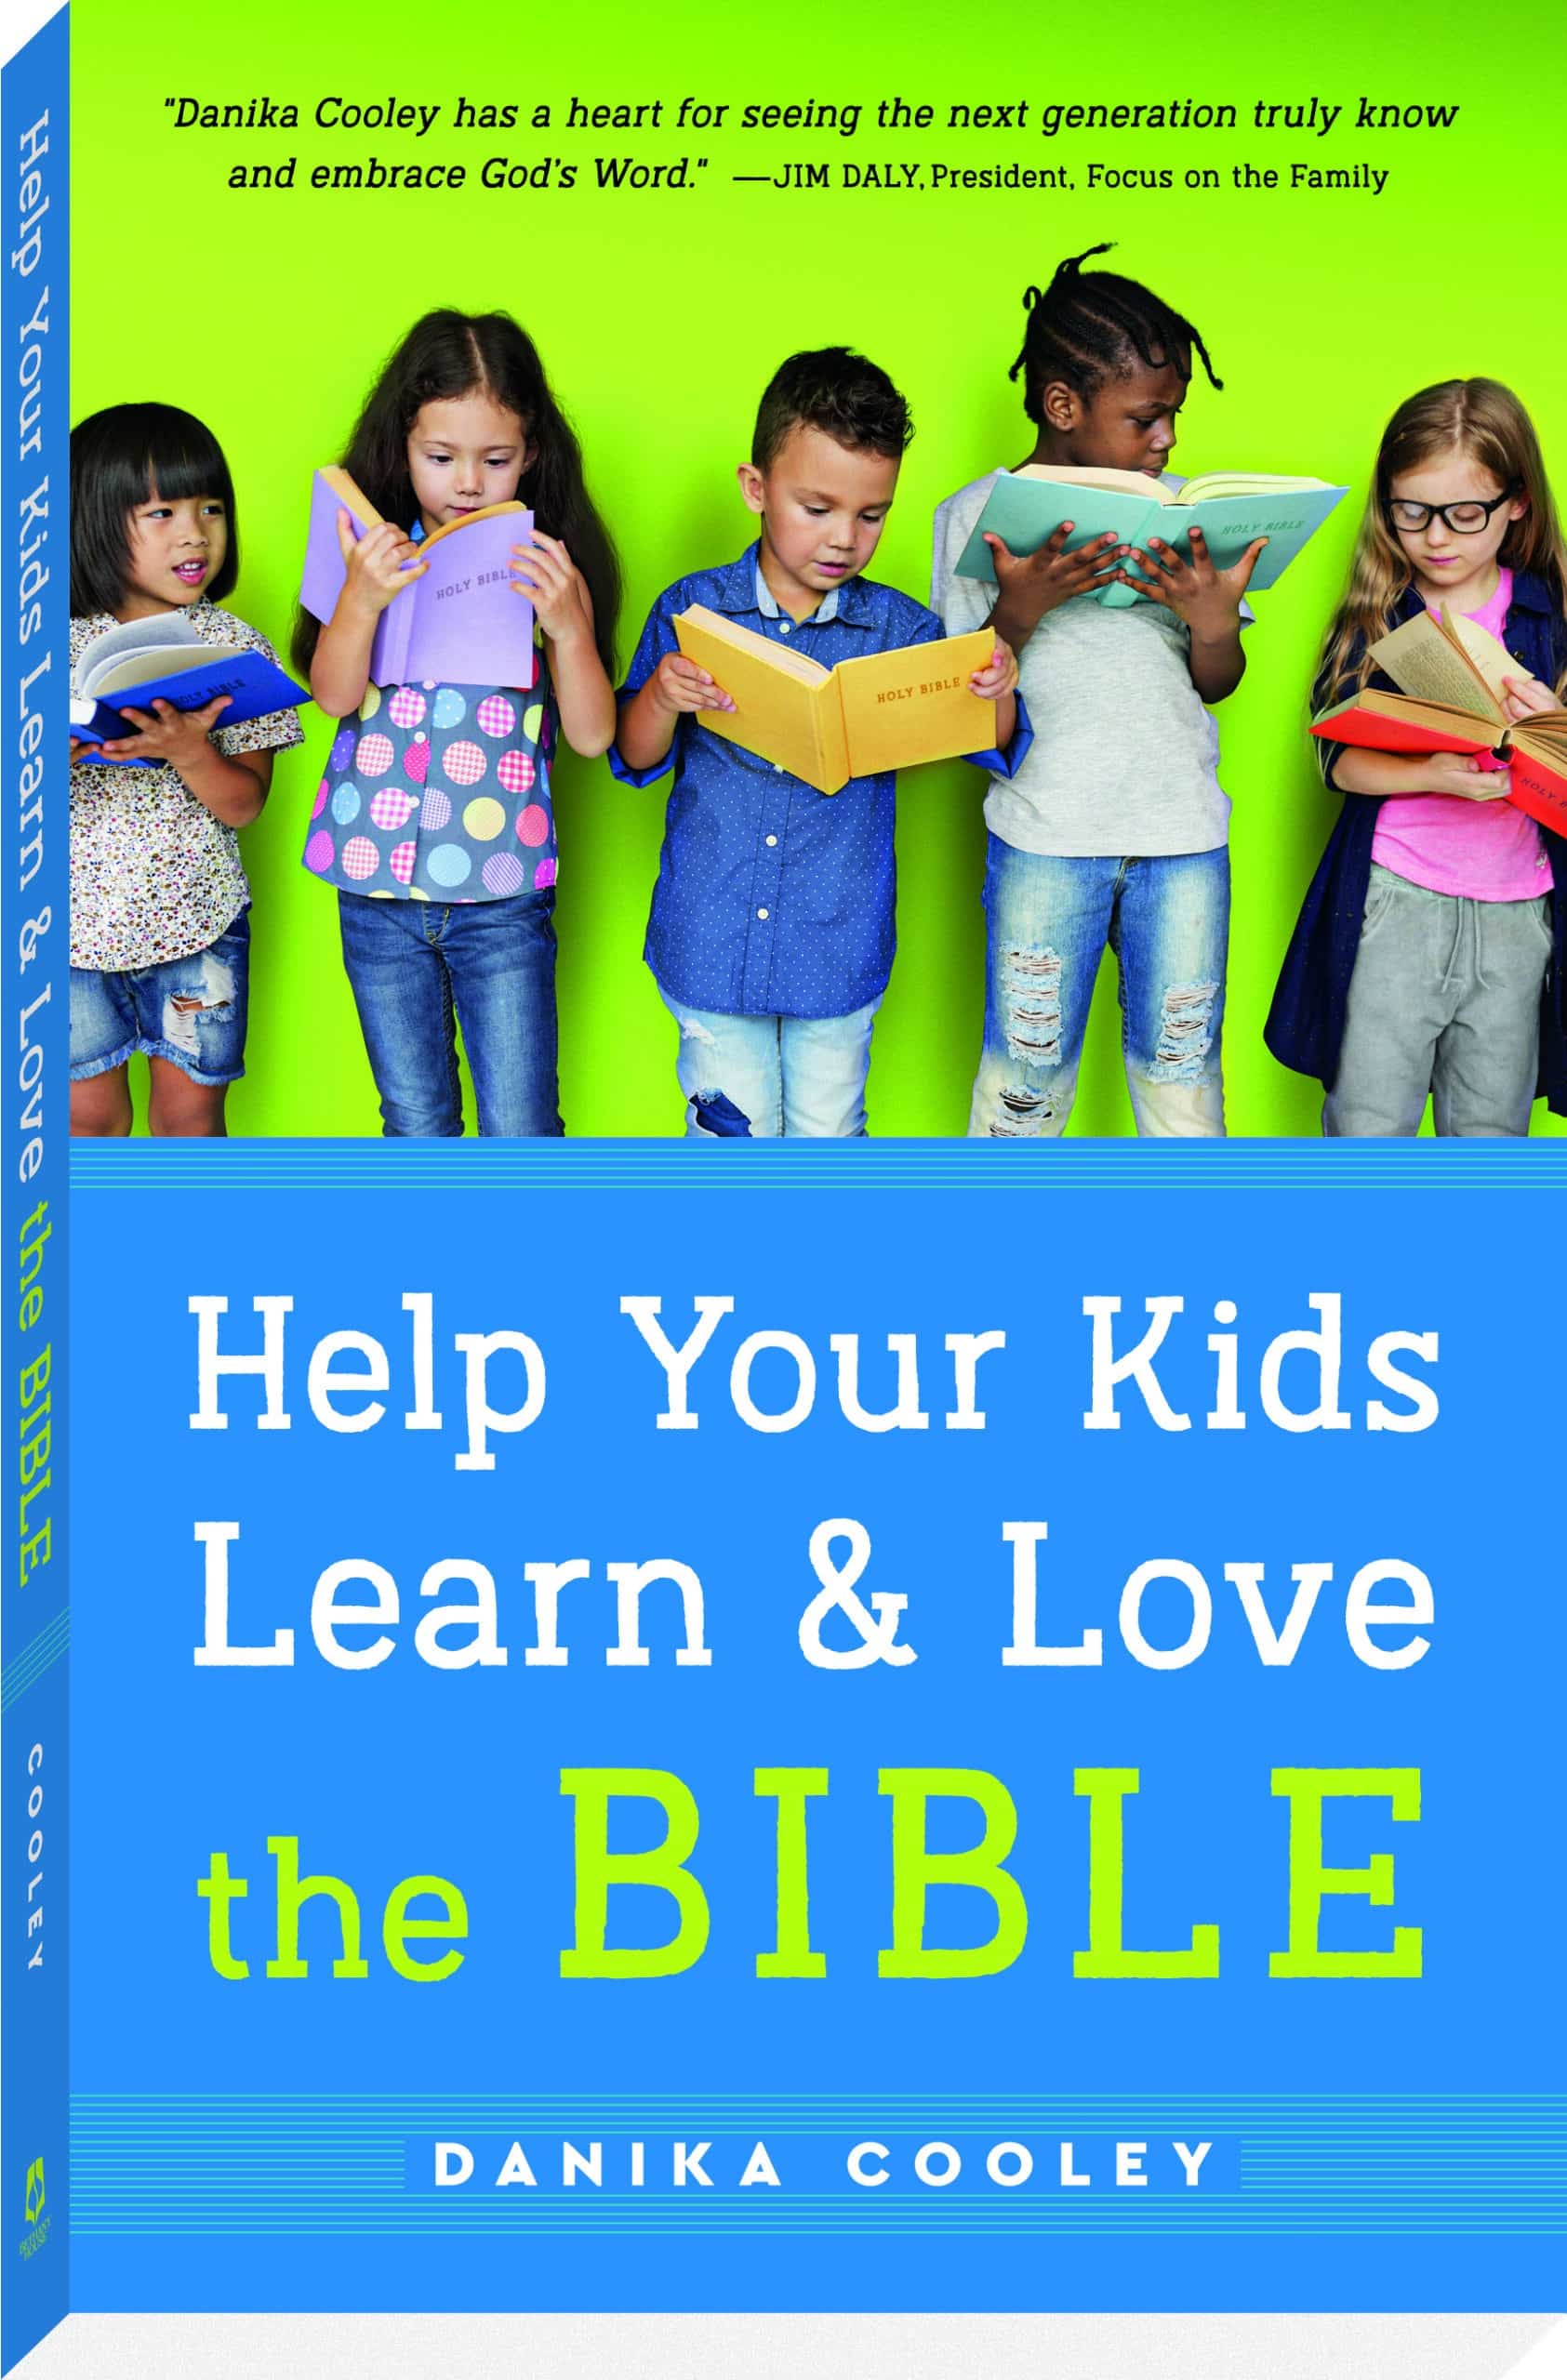 help-your-kids-learn-love-the-bible-a-teacher-s-manual-for